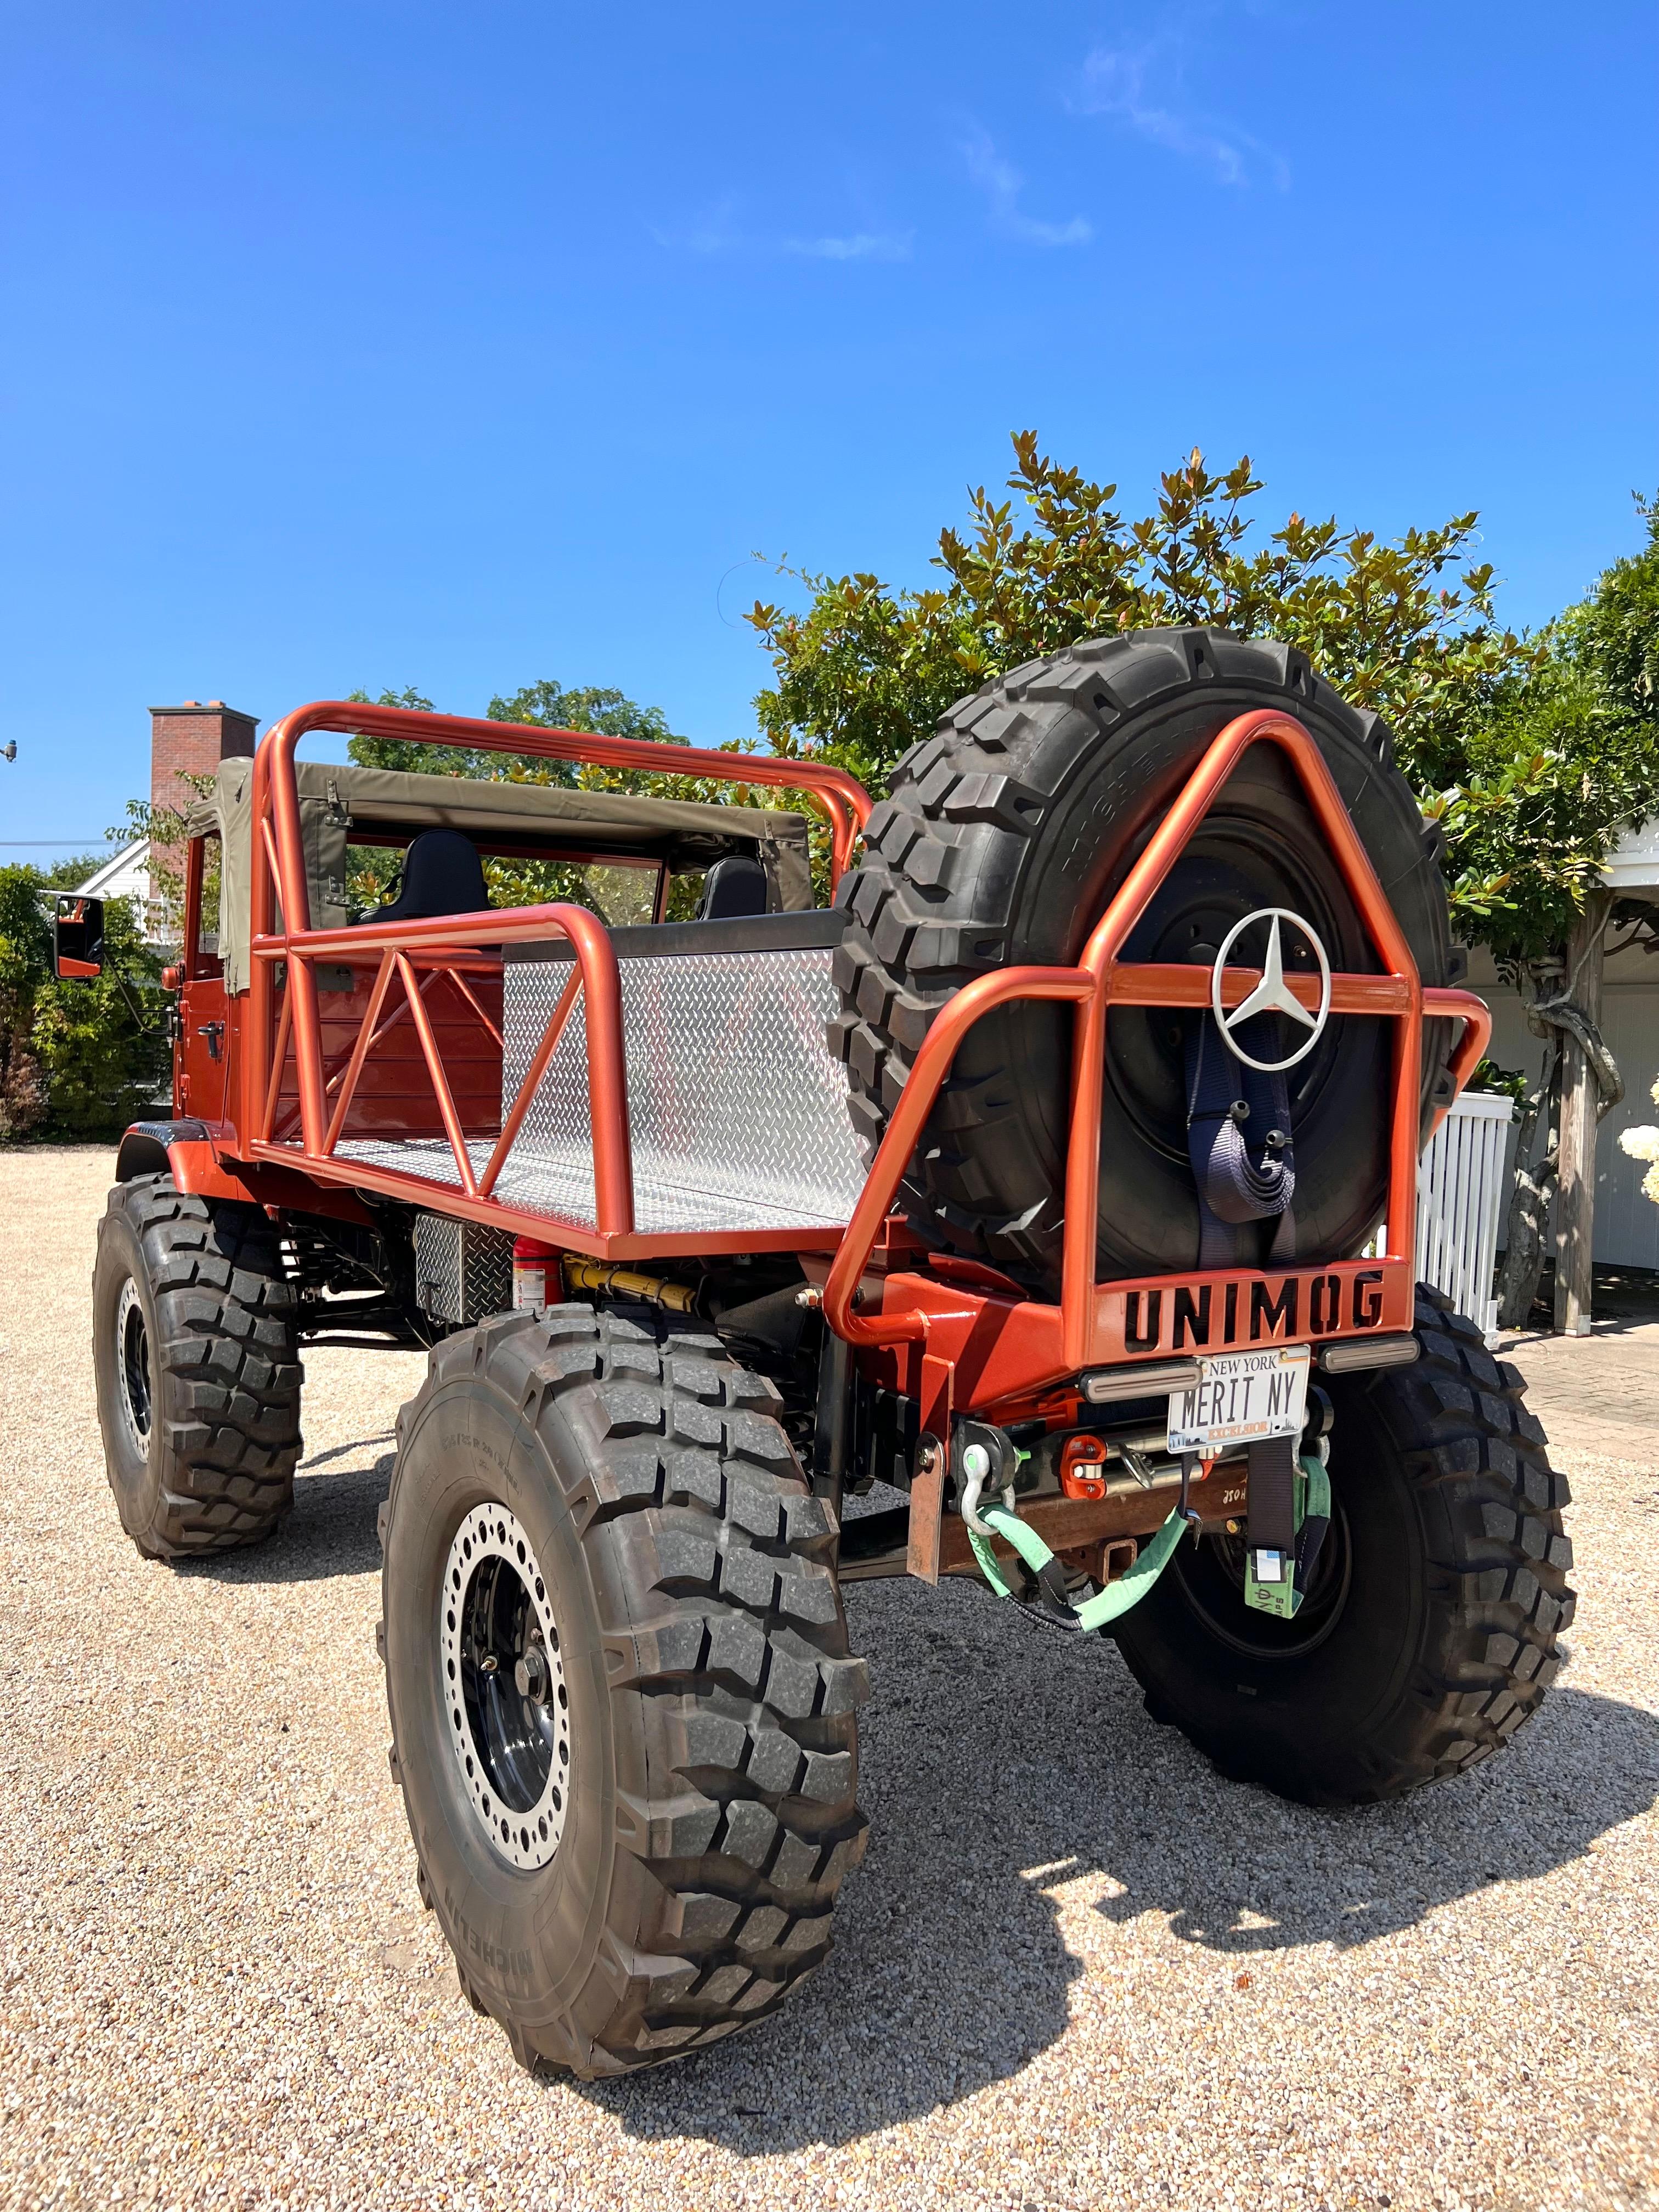 Gorgeous 1966 Mercedes Benz 404 Unimog in custom burnt orange. Original engine has been replaced with turbo diesel. 20 foot scissor lift hidden inside the bench in the truck bed. Fully operable with kill switch. Scissor lift can be operated by a